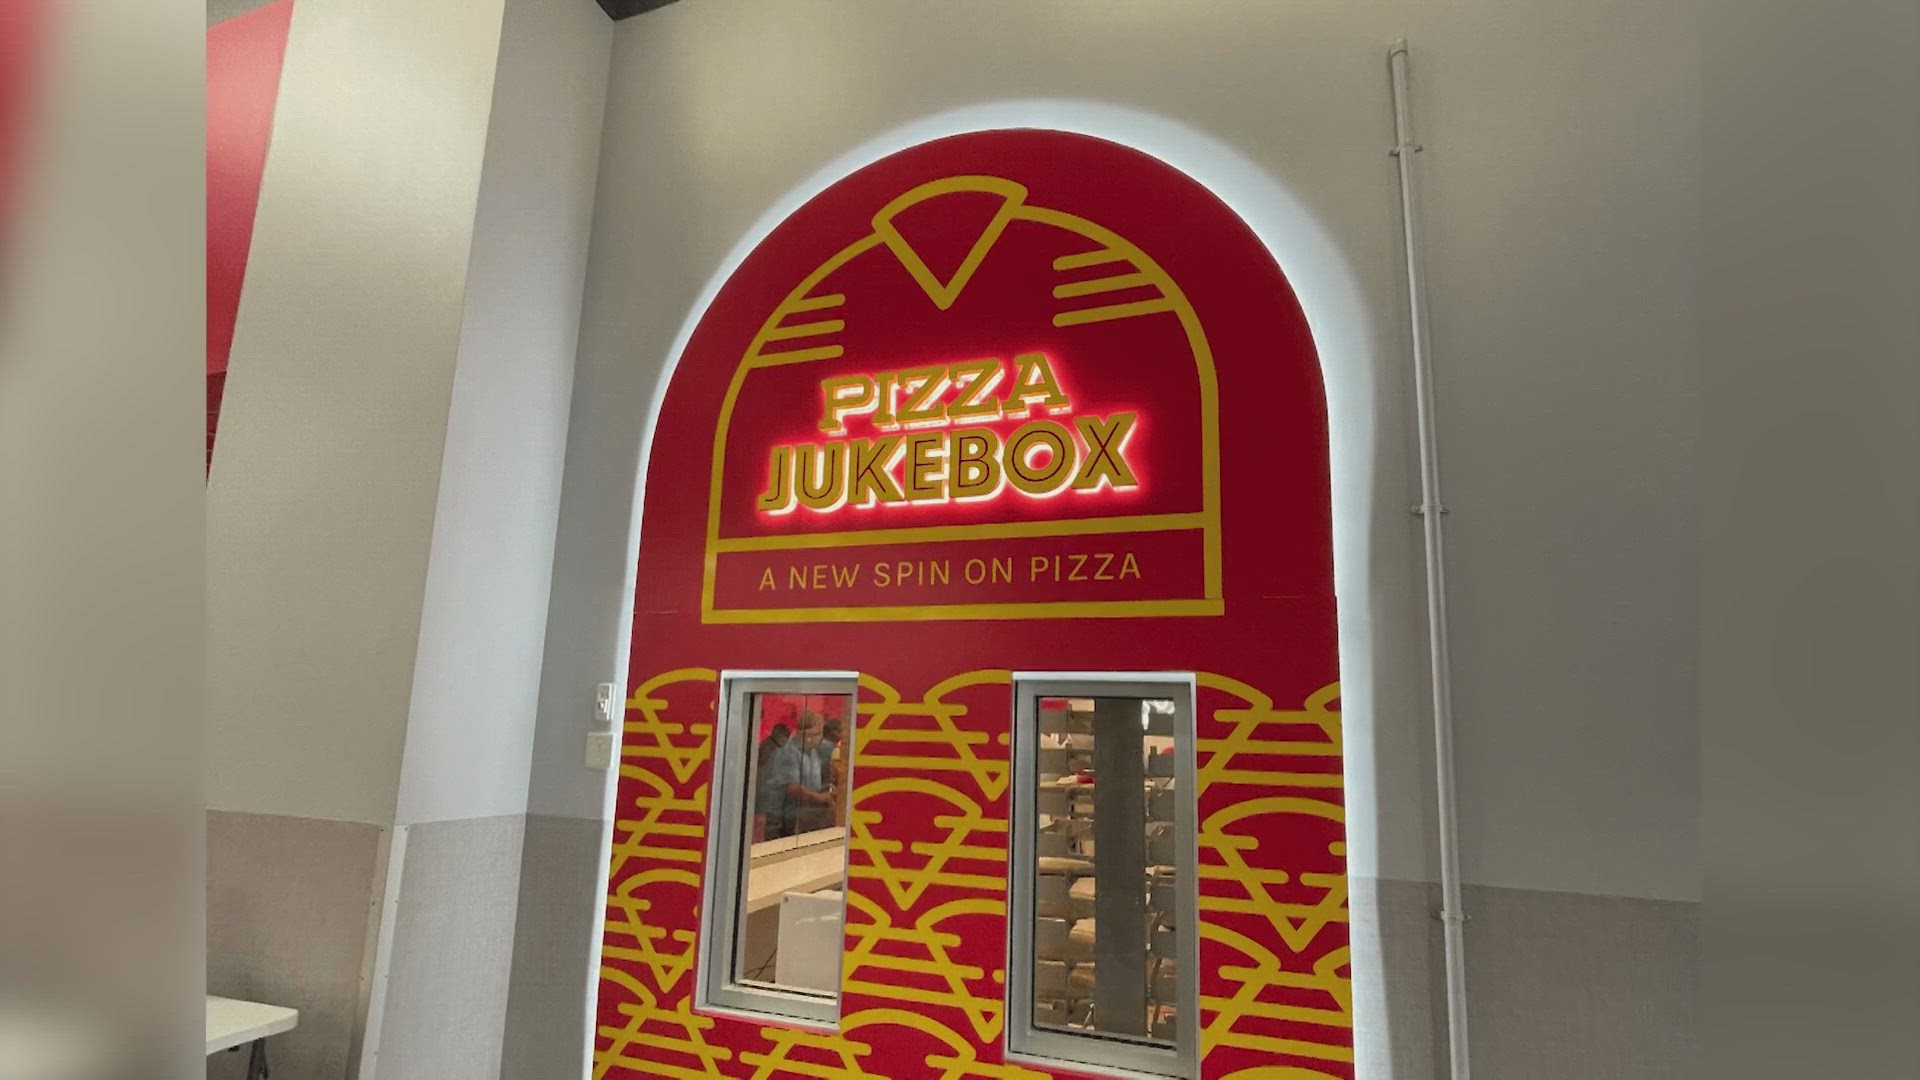 Red Mango and Pizza Jukebox teamed up to create a one-of-a-kind experience available to pizza lovers in Frisco.